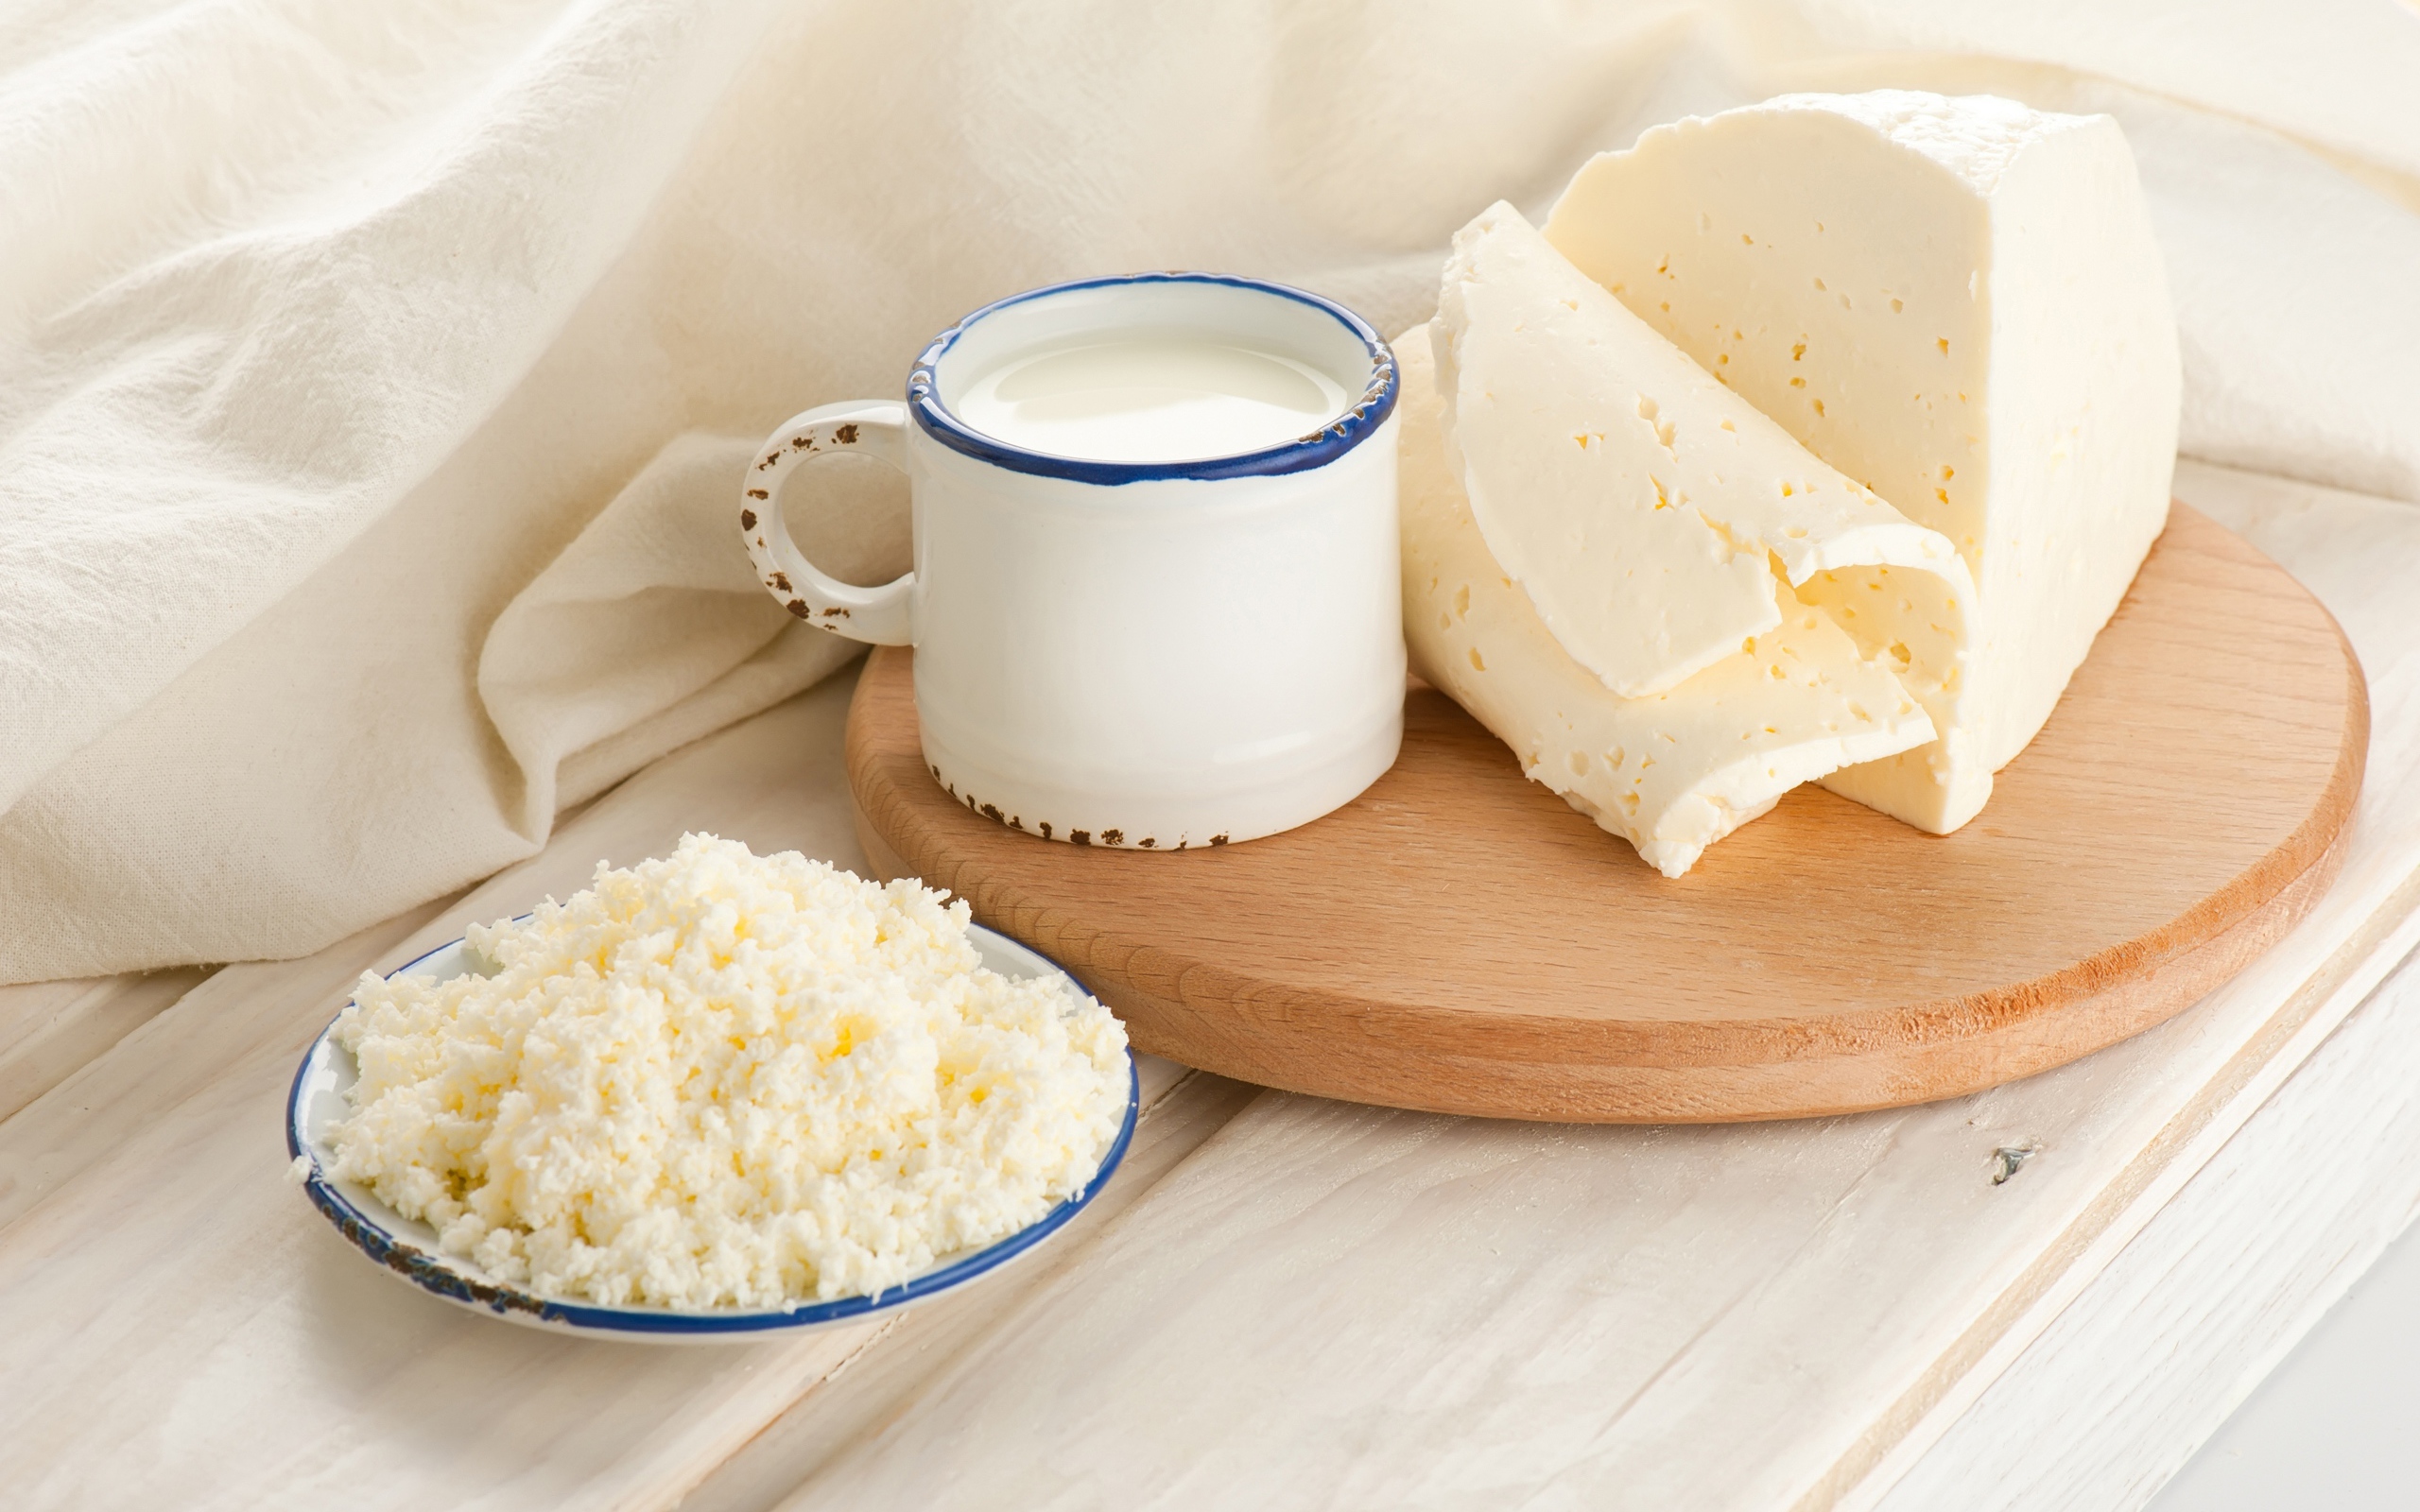 Cottage cheese, cheese and a mug of milk on the table